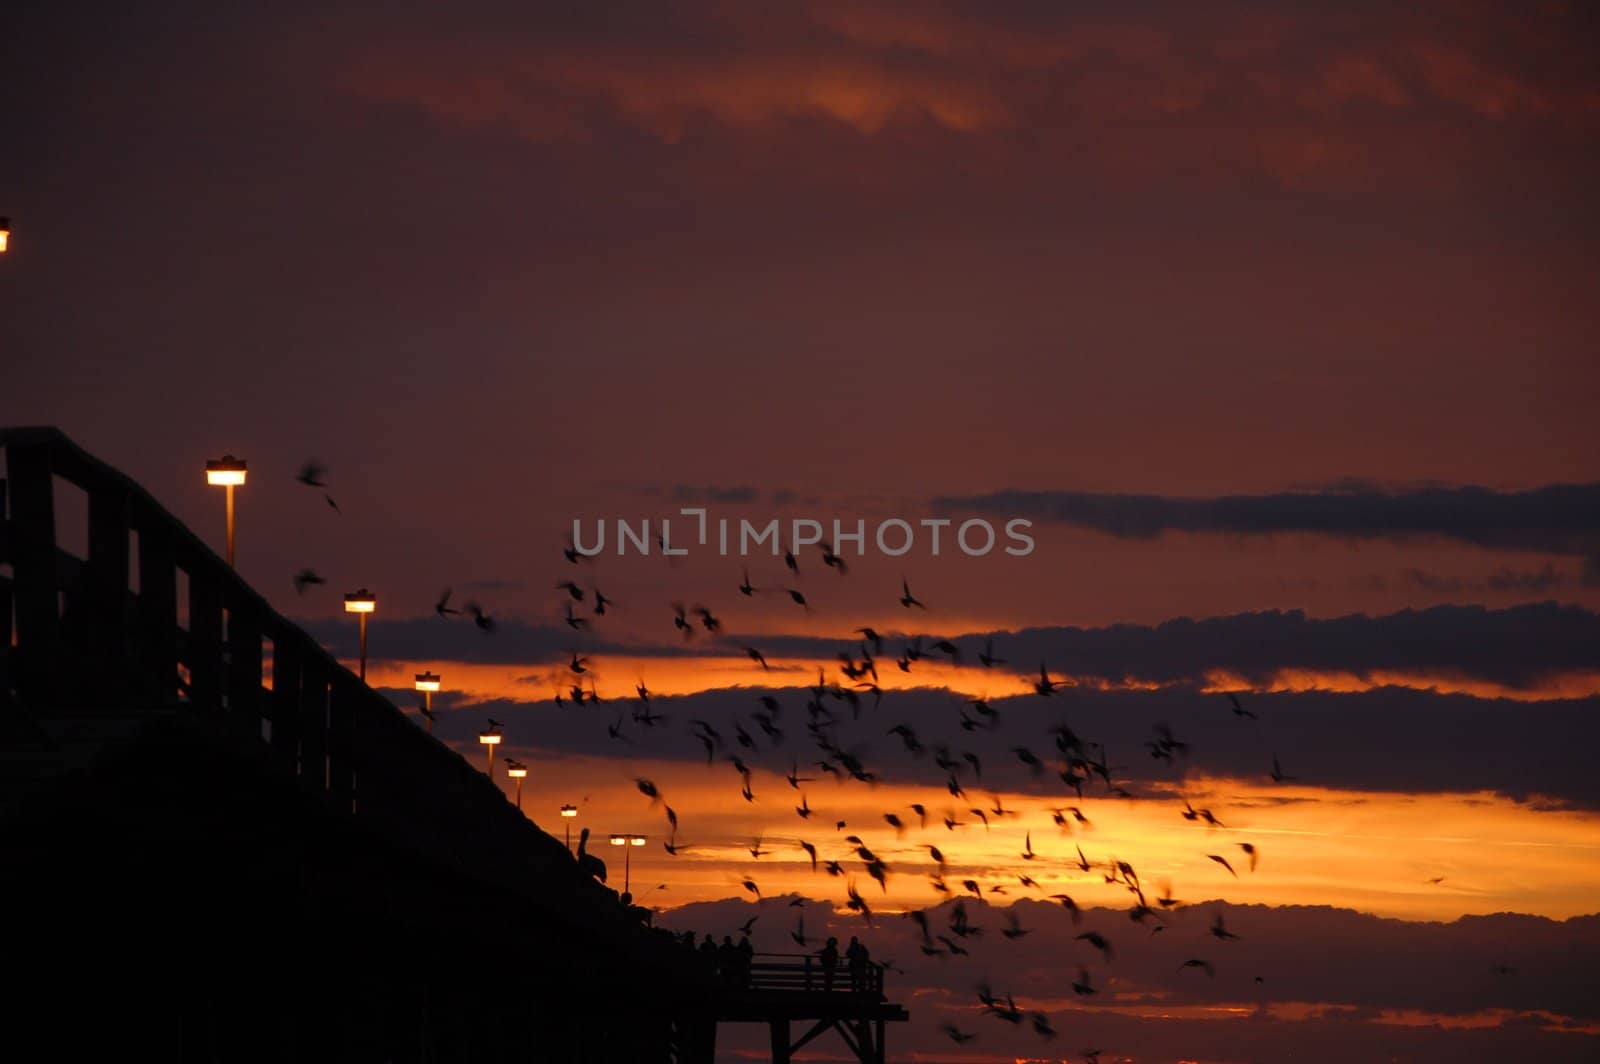 The sunrise over the pier at Kure Beach with birds flying around